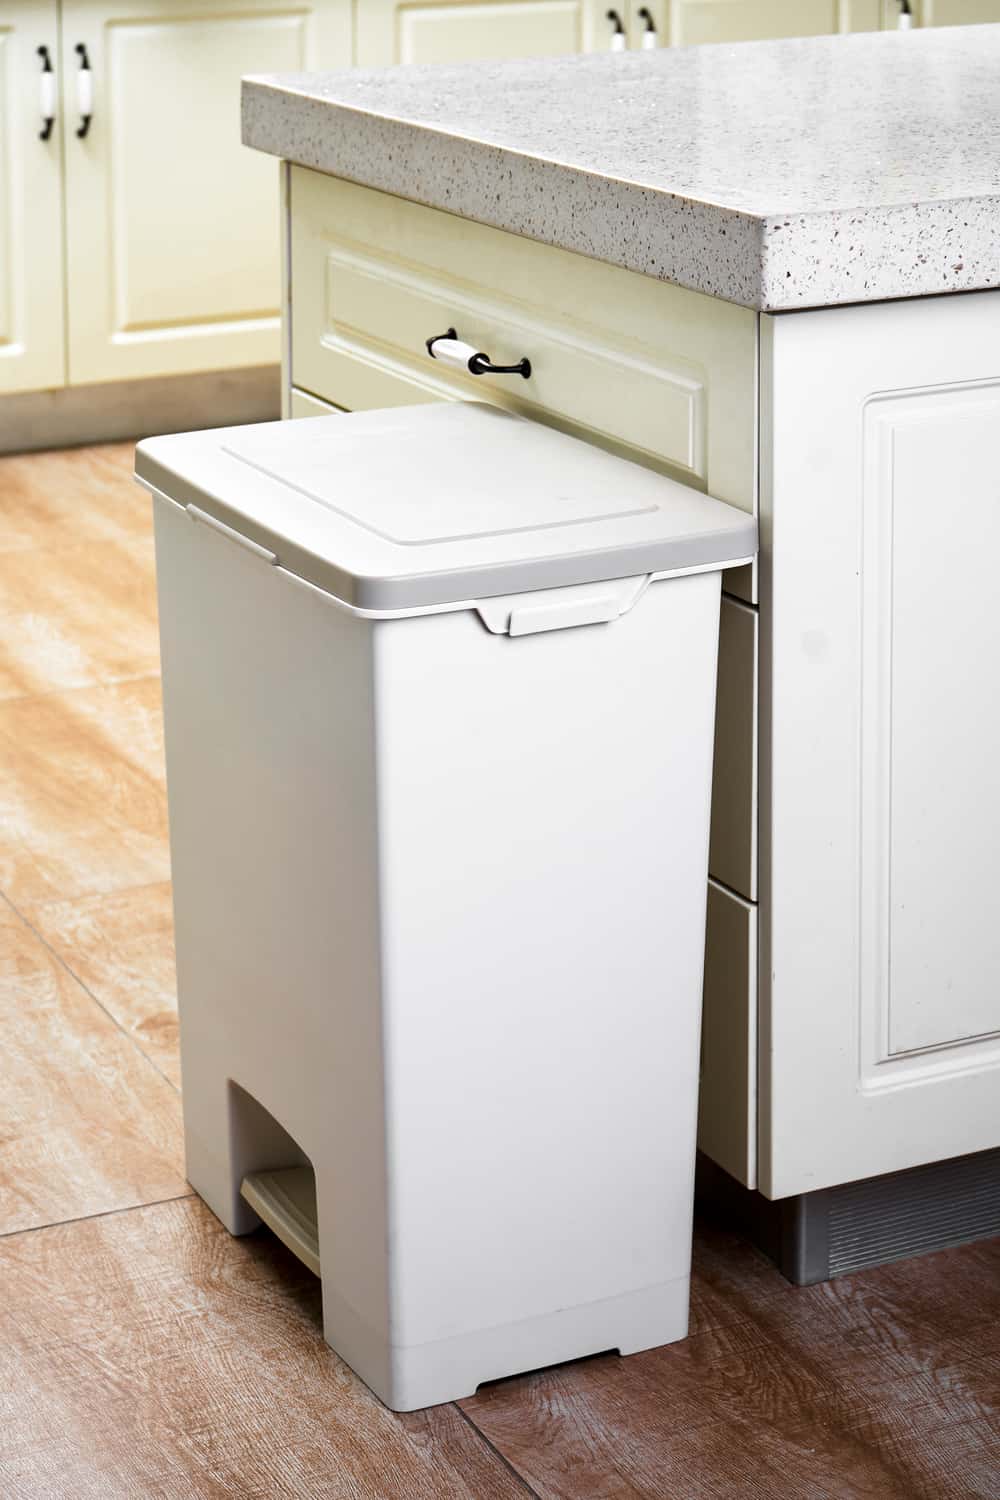 18 Homemade Trash Can Cabinet Plans You, Kitchen Trash Can Cabinet Plans